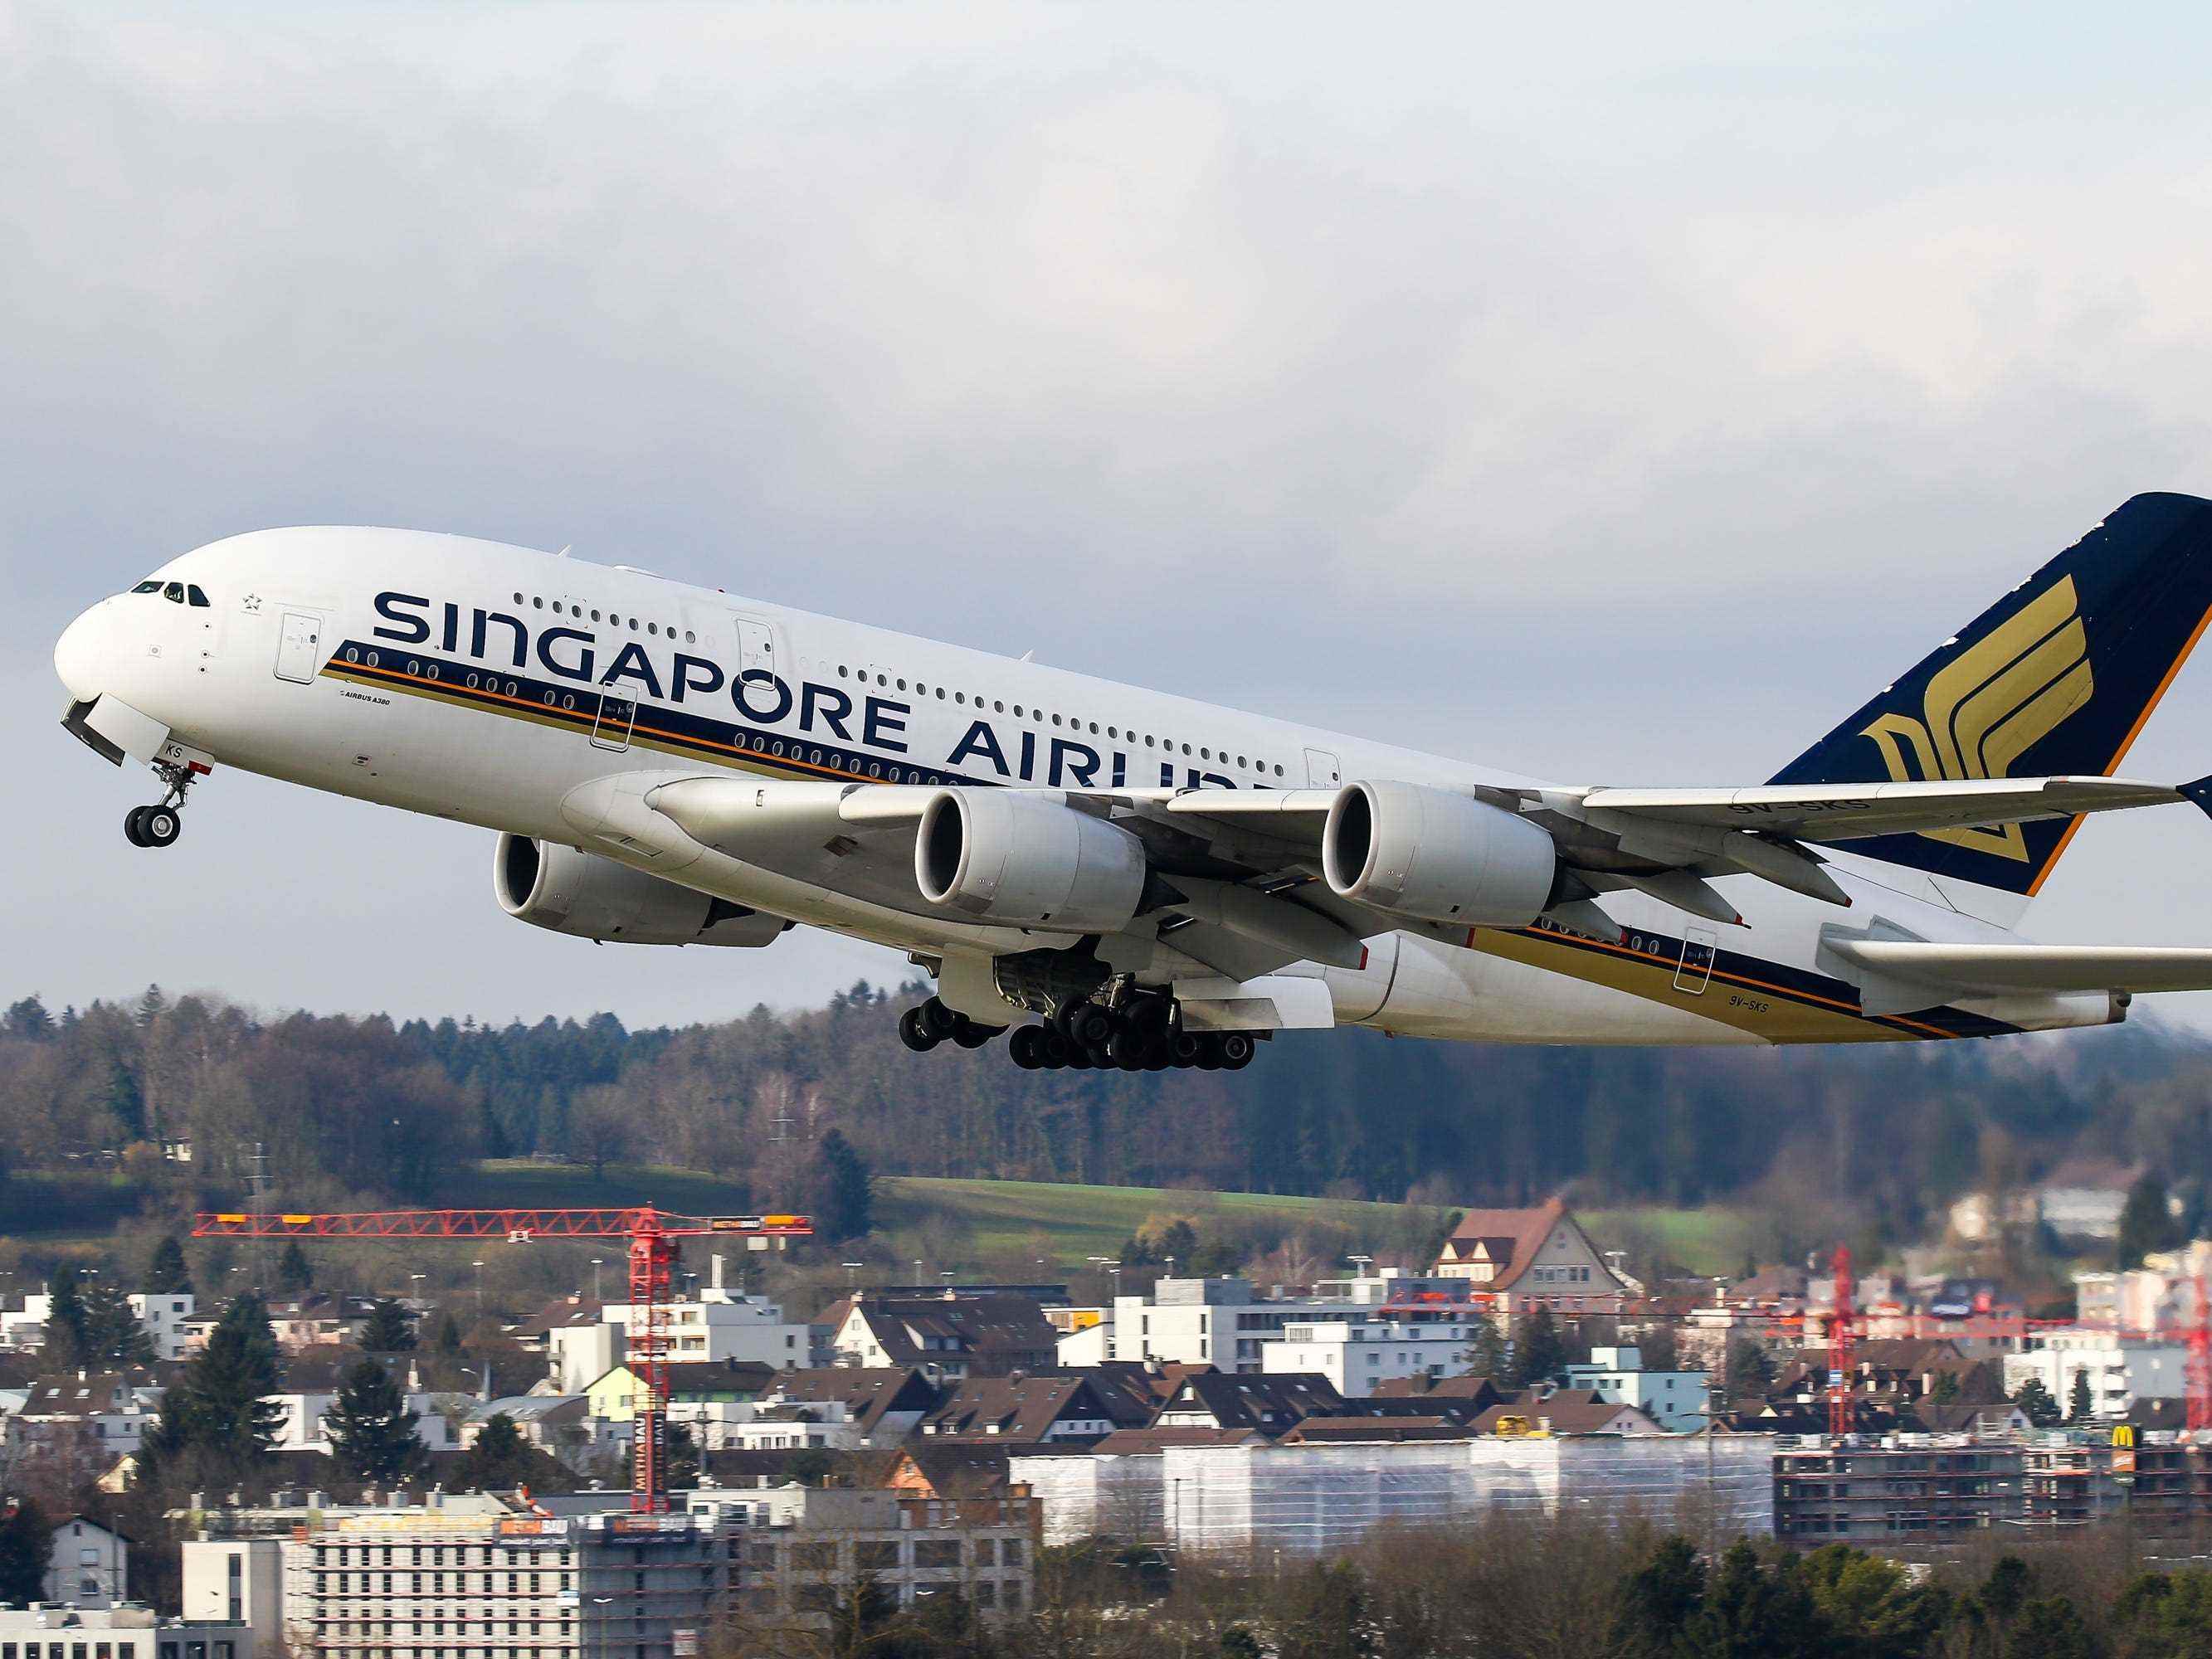 Singapore Airlines Airbus A380-800.